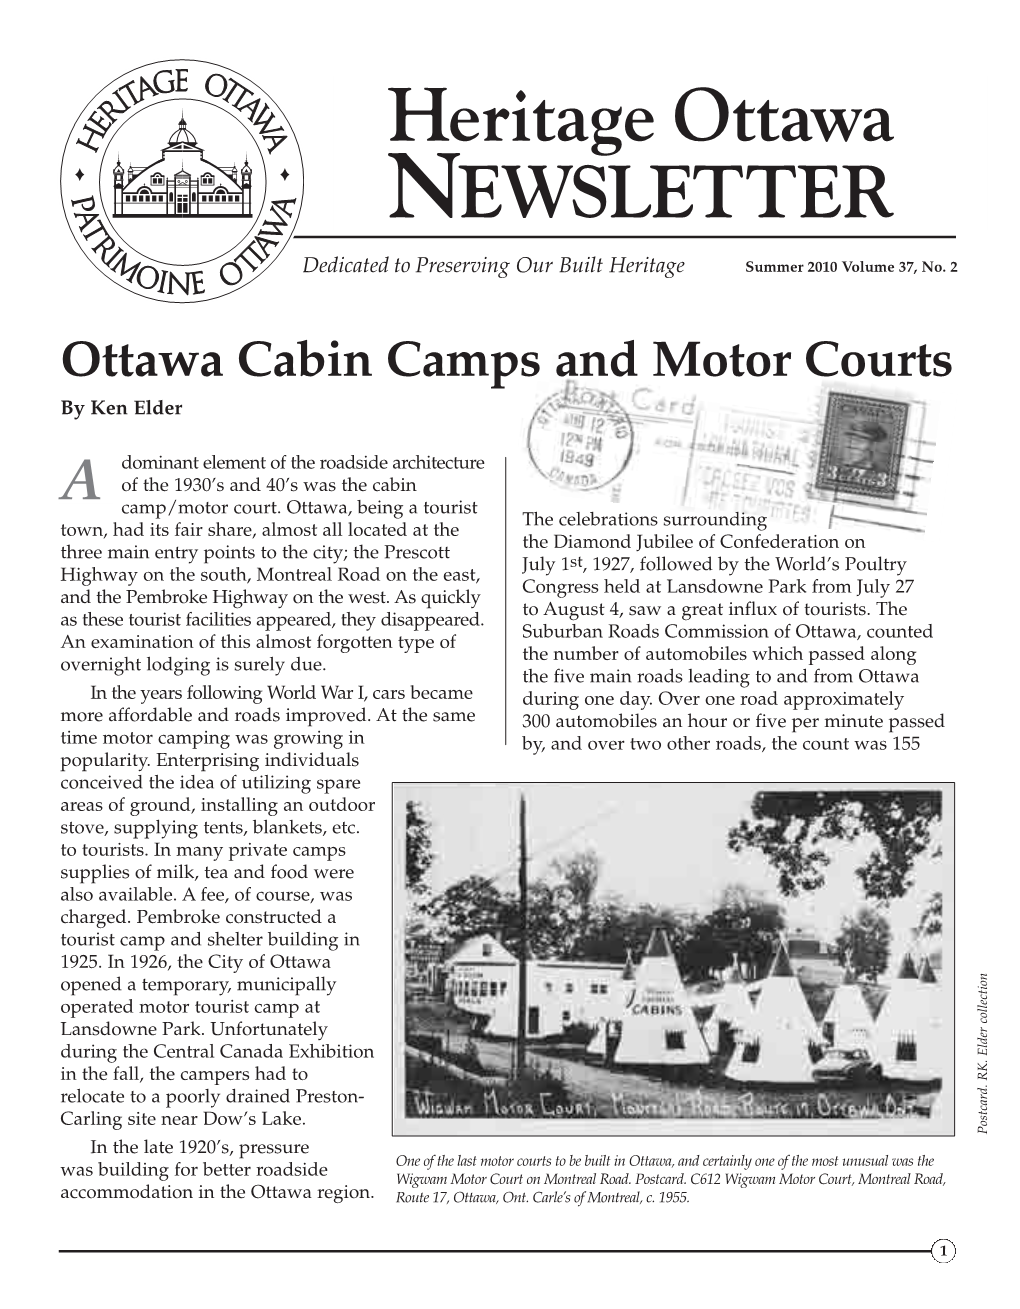 Ottawa Cabin Camps and Motor Courts by Ken Elder